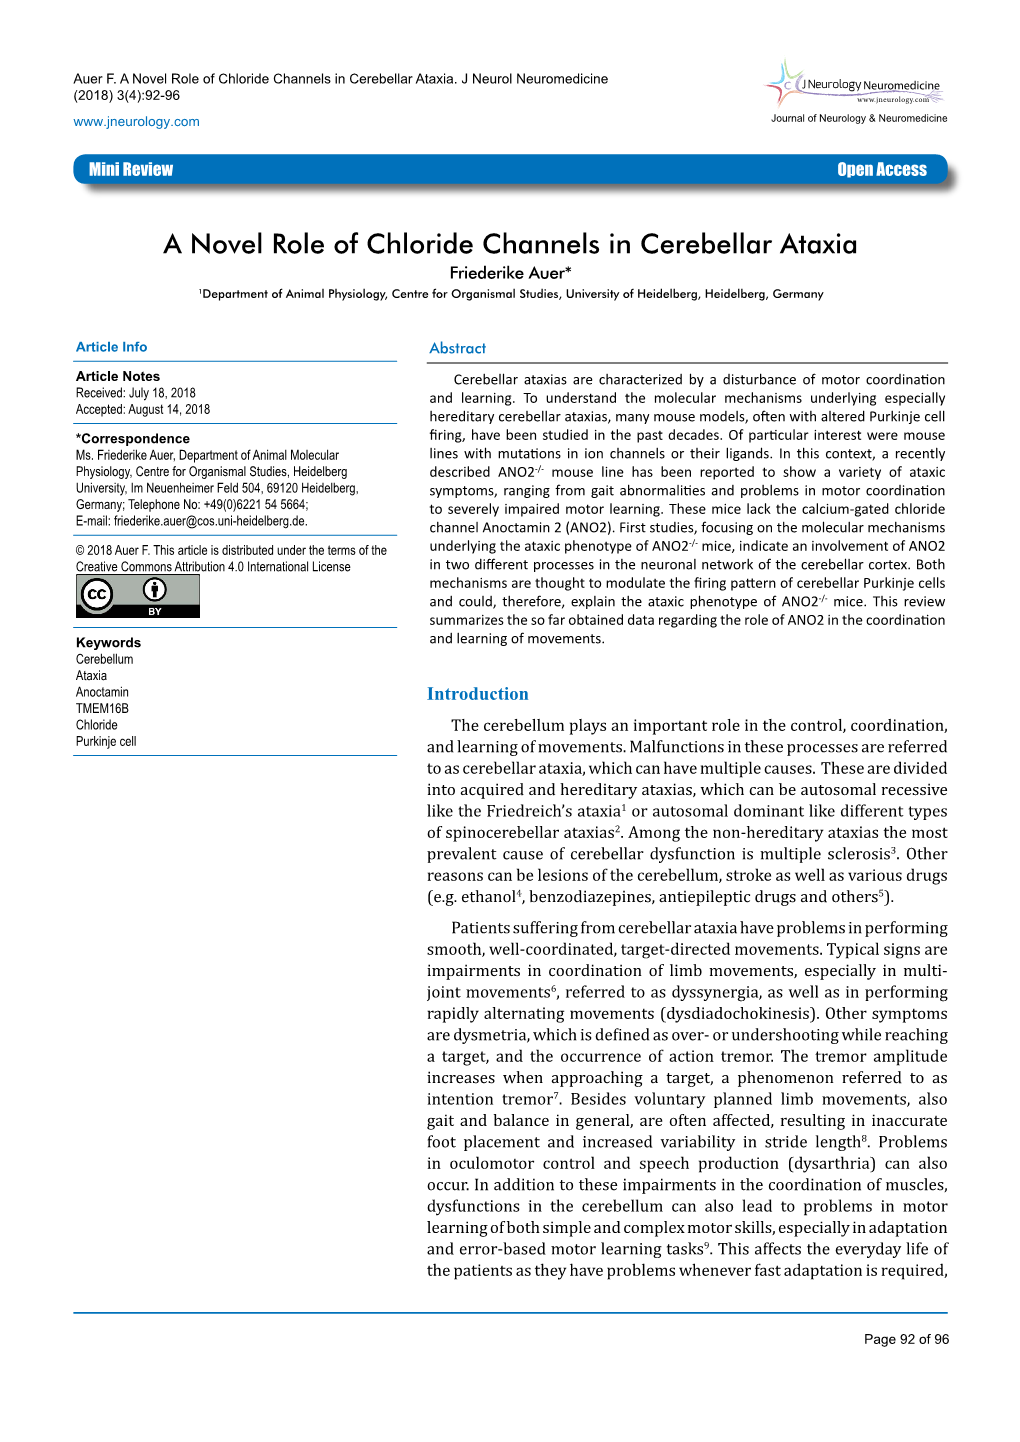 A Novel Role of Chloride Channels in Cerebellar Ataxia